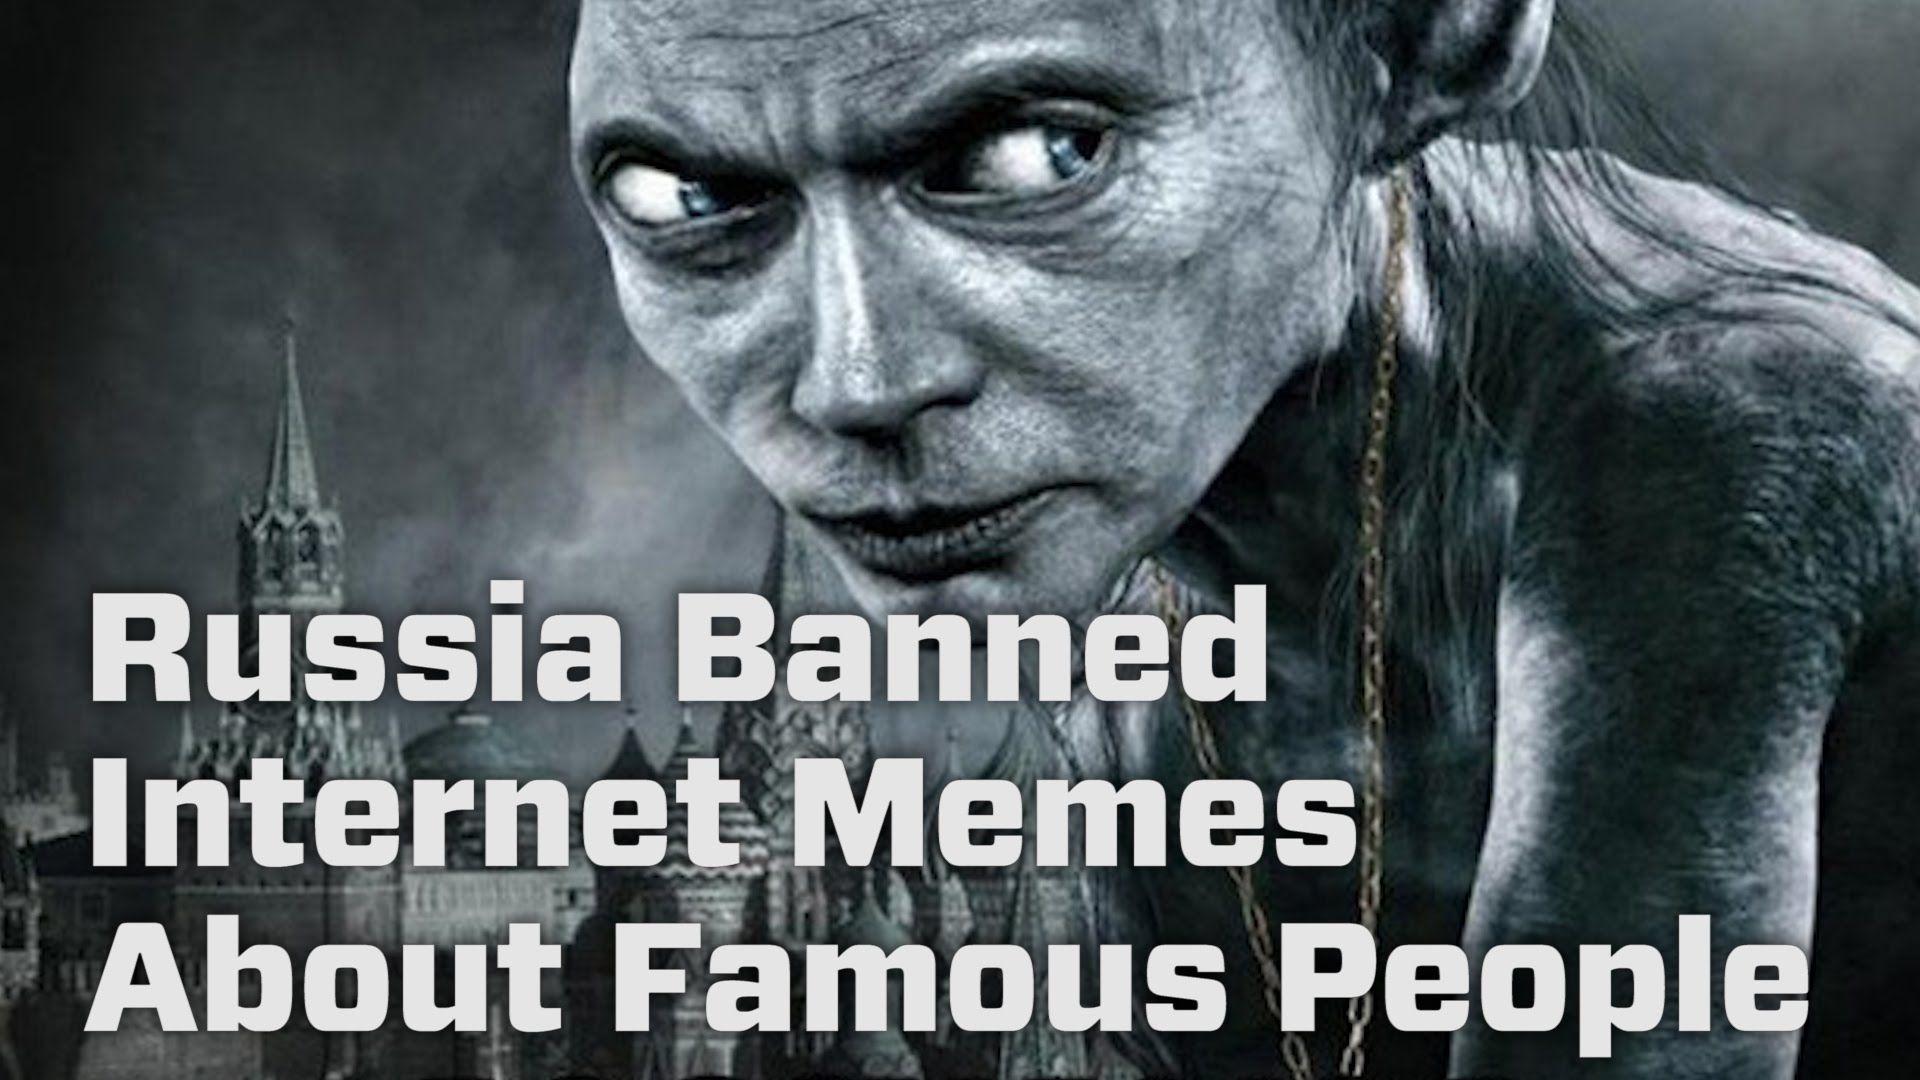 Russian ban. Russia banned twitter, Facebook meme. Quotes famous people about Russia.